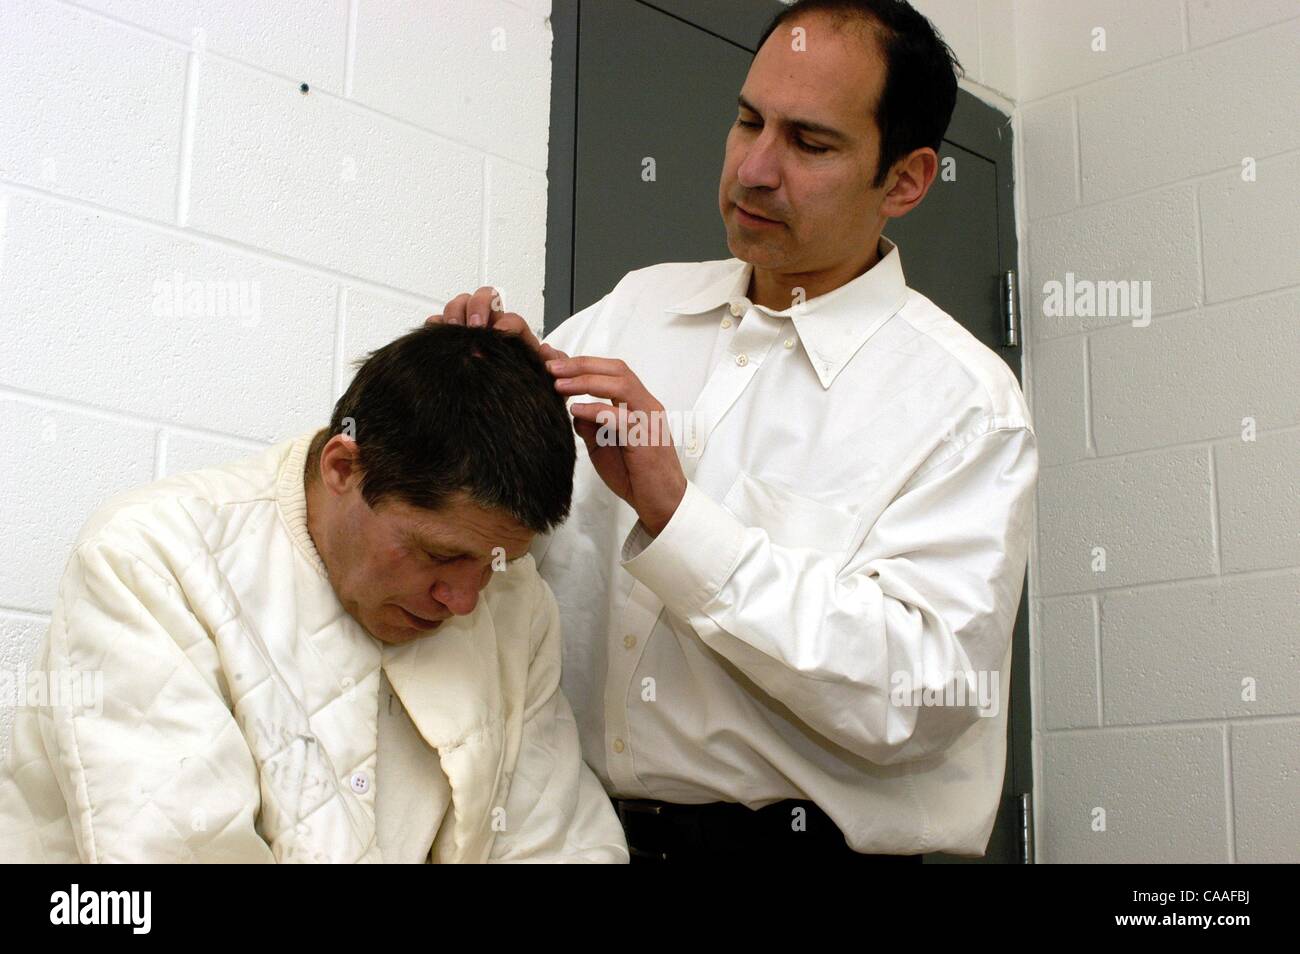 Mar 11, 2004 - Huntsville, AL, USA - Dr. STEVE TABET examines AIDs inmate at Limestone Prison. Dr. Stephen Tabet, MD, MPH, an infectious disease specialist, released a 60-page report addressing substandard medical care provided to HIV and AIDS infected prisoners confined at Limestone Correctional Fa Stock Photo